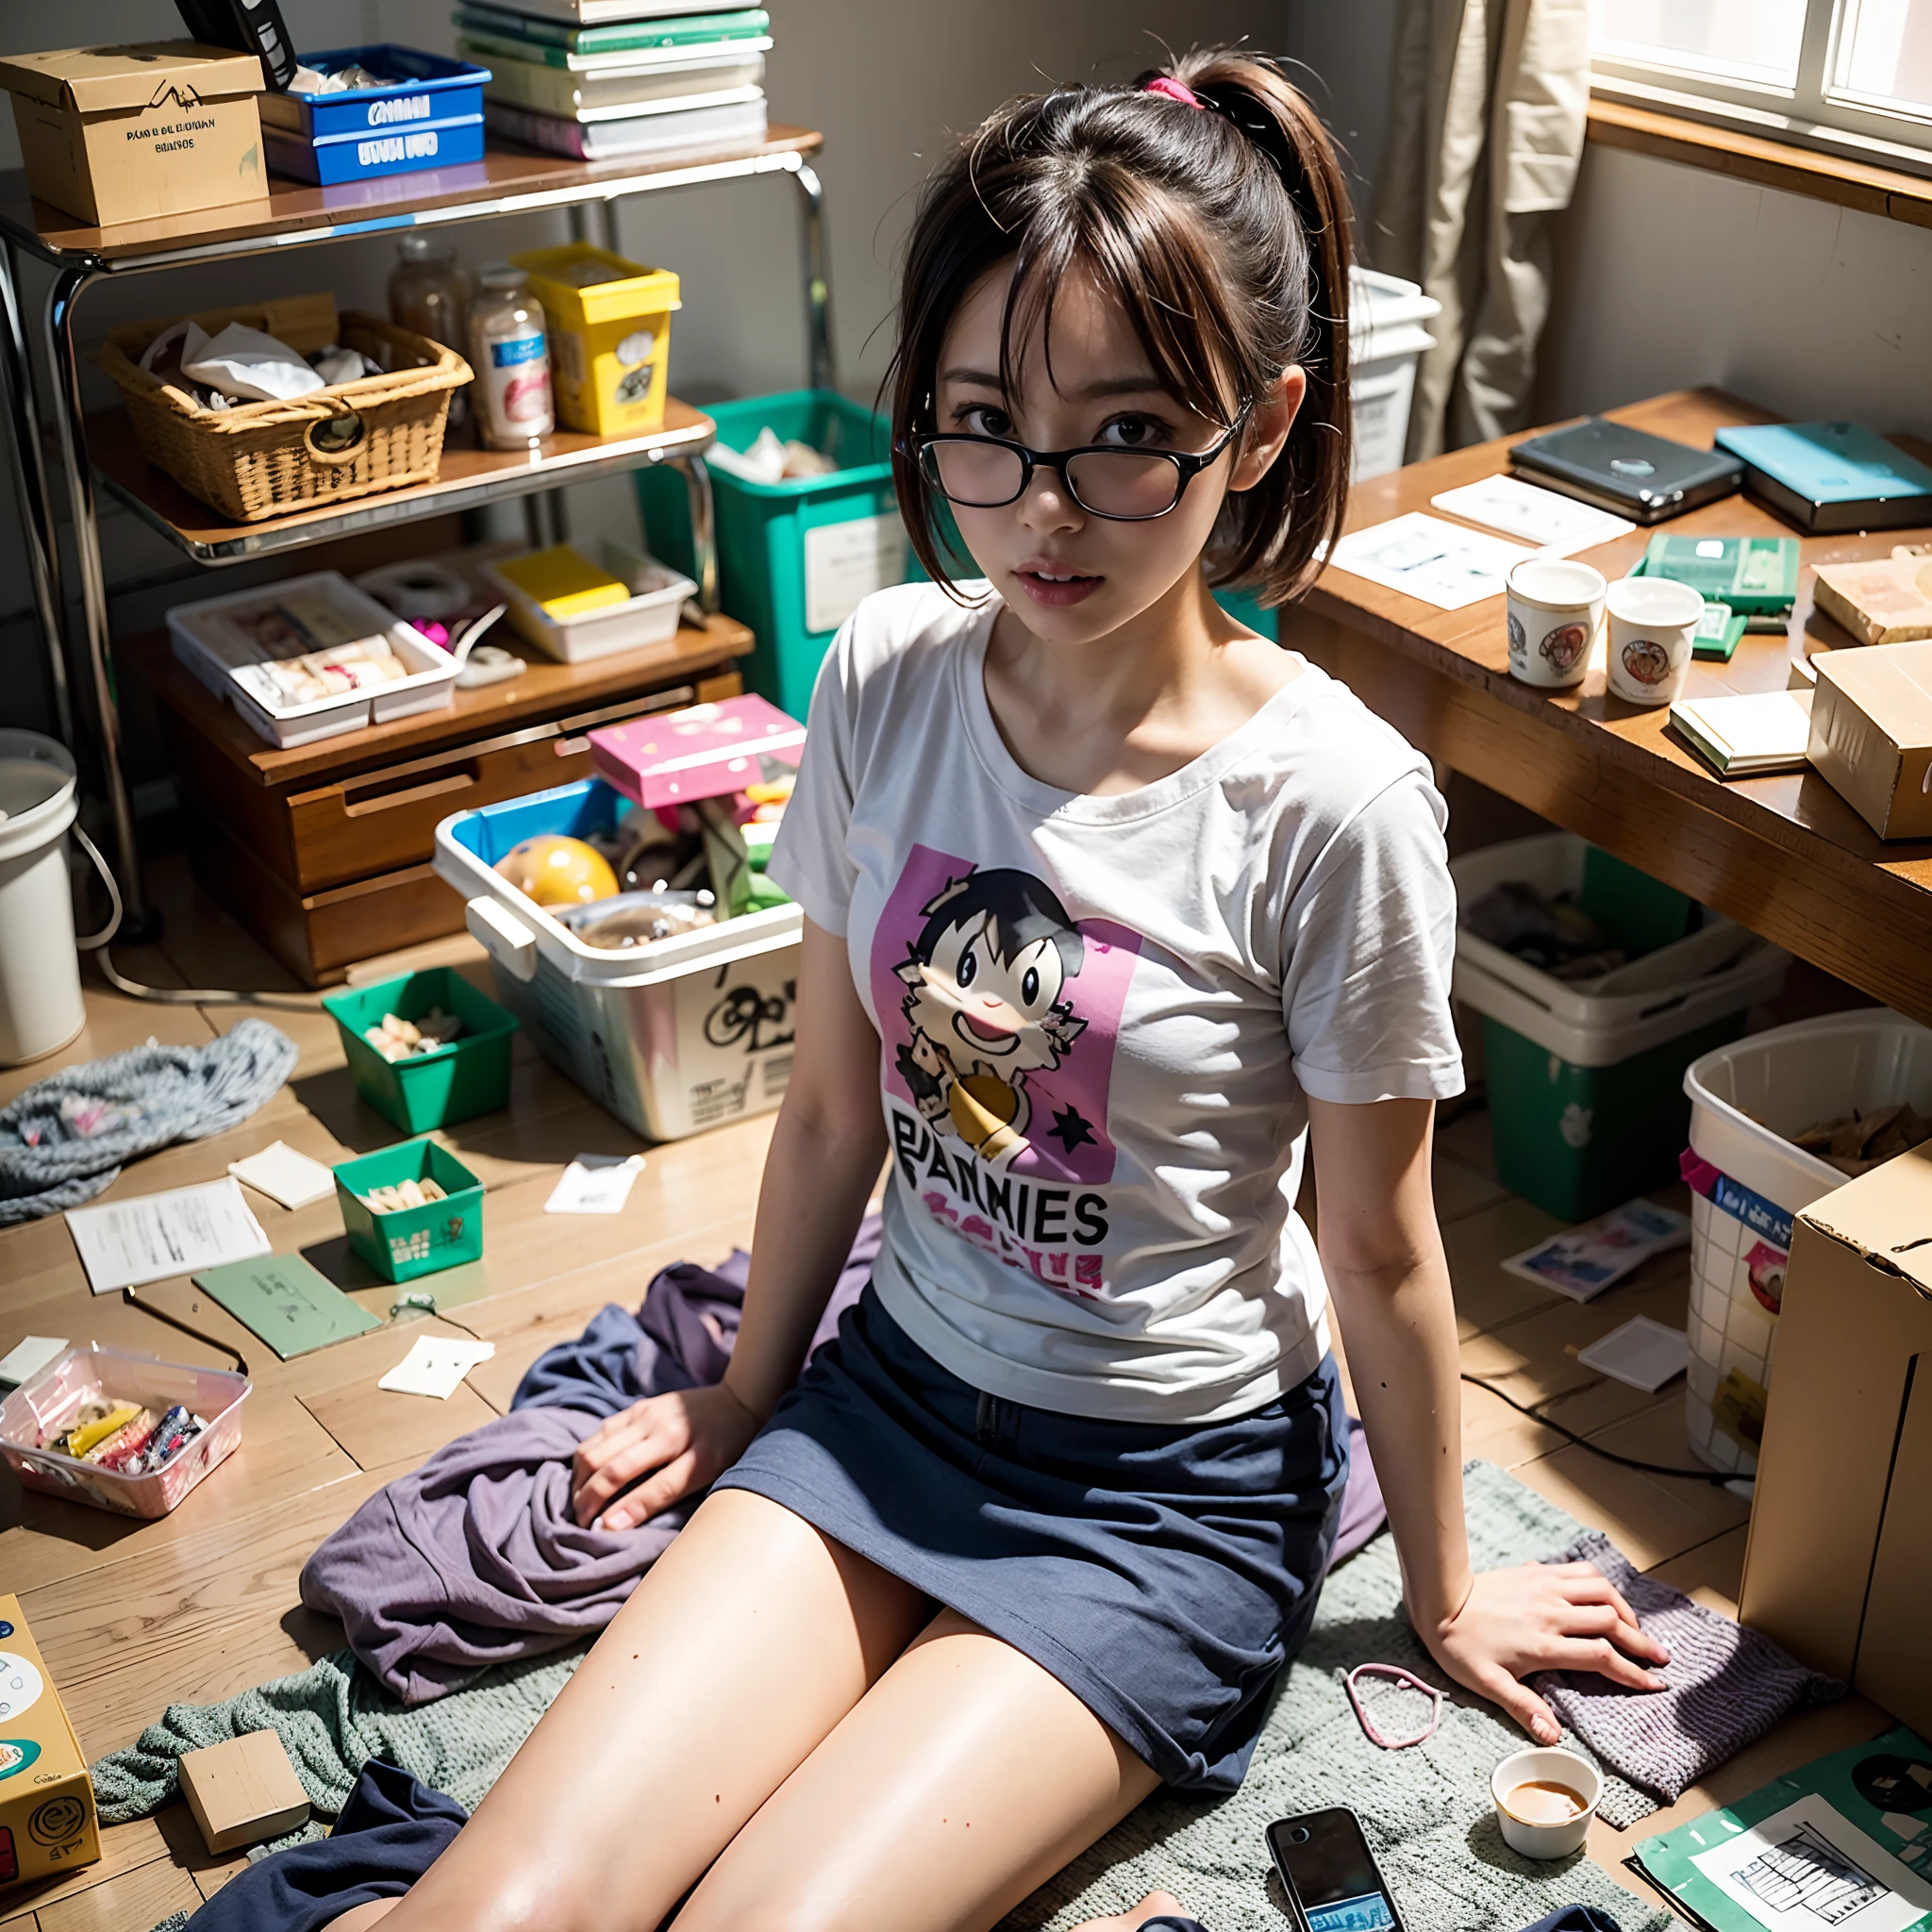 (8k、Raw photography、Top image quality、​masterpiece、:1.2)、(realisitic、Photorealsitic:1.37)、1 girl、solo、(Sitting on the garbage in an incredibly dirty room、Cute Japan girl operating smartphone:1.4)、Anime Otaku Girls、A darK-haired、short-hair、dishevled hair、Unkempt hair、bangss、Happy expression on face、Small bust、Wearing glasses、Anime Character Print T-Shirt、a miniskirt、head phone、Sitting on the floor、Agra、Room full of garbage、Garbage with rolled tissue、Surrounded by mountains of cartoons、Lots of anime character figures are on display.、Anime poster on the wall、Potato chips on the desk、Spilled potato chips、Roll Energy Drink、Scattering of food waste、Messy room、Underwear left undressed on the floor、超A high resolution、physically-based renderingt、cinematlic lighting、dynamic ungle